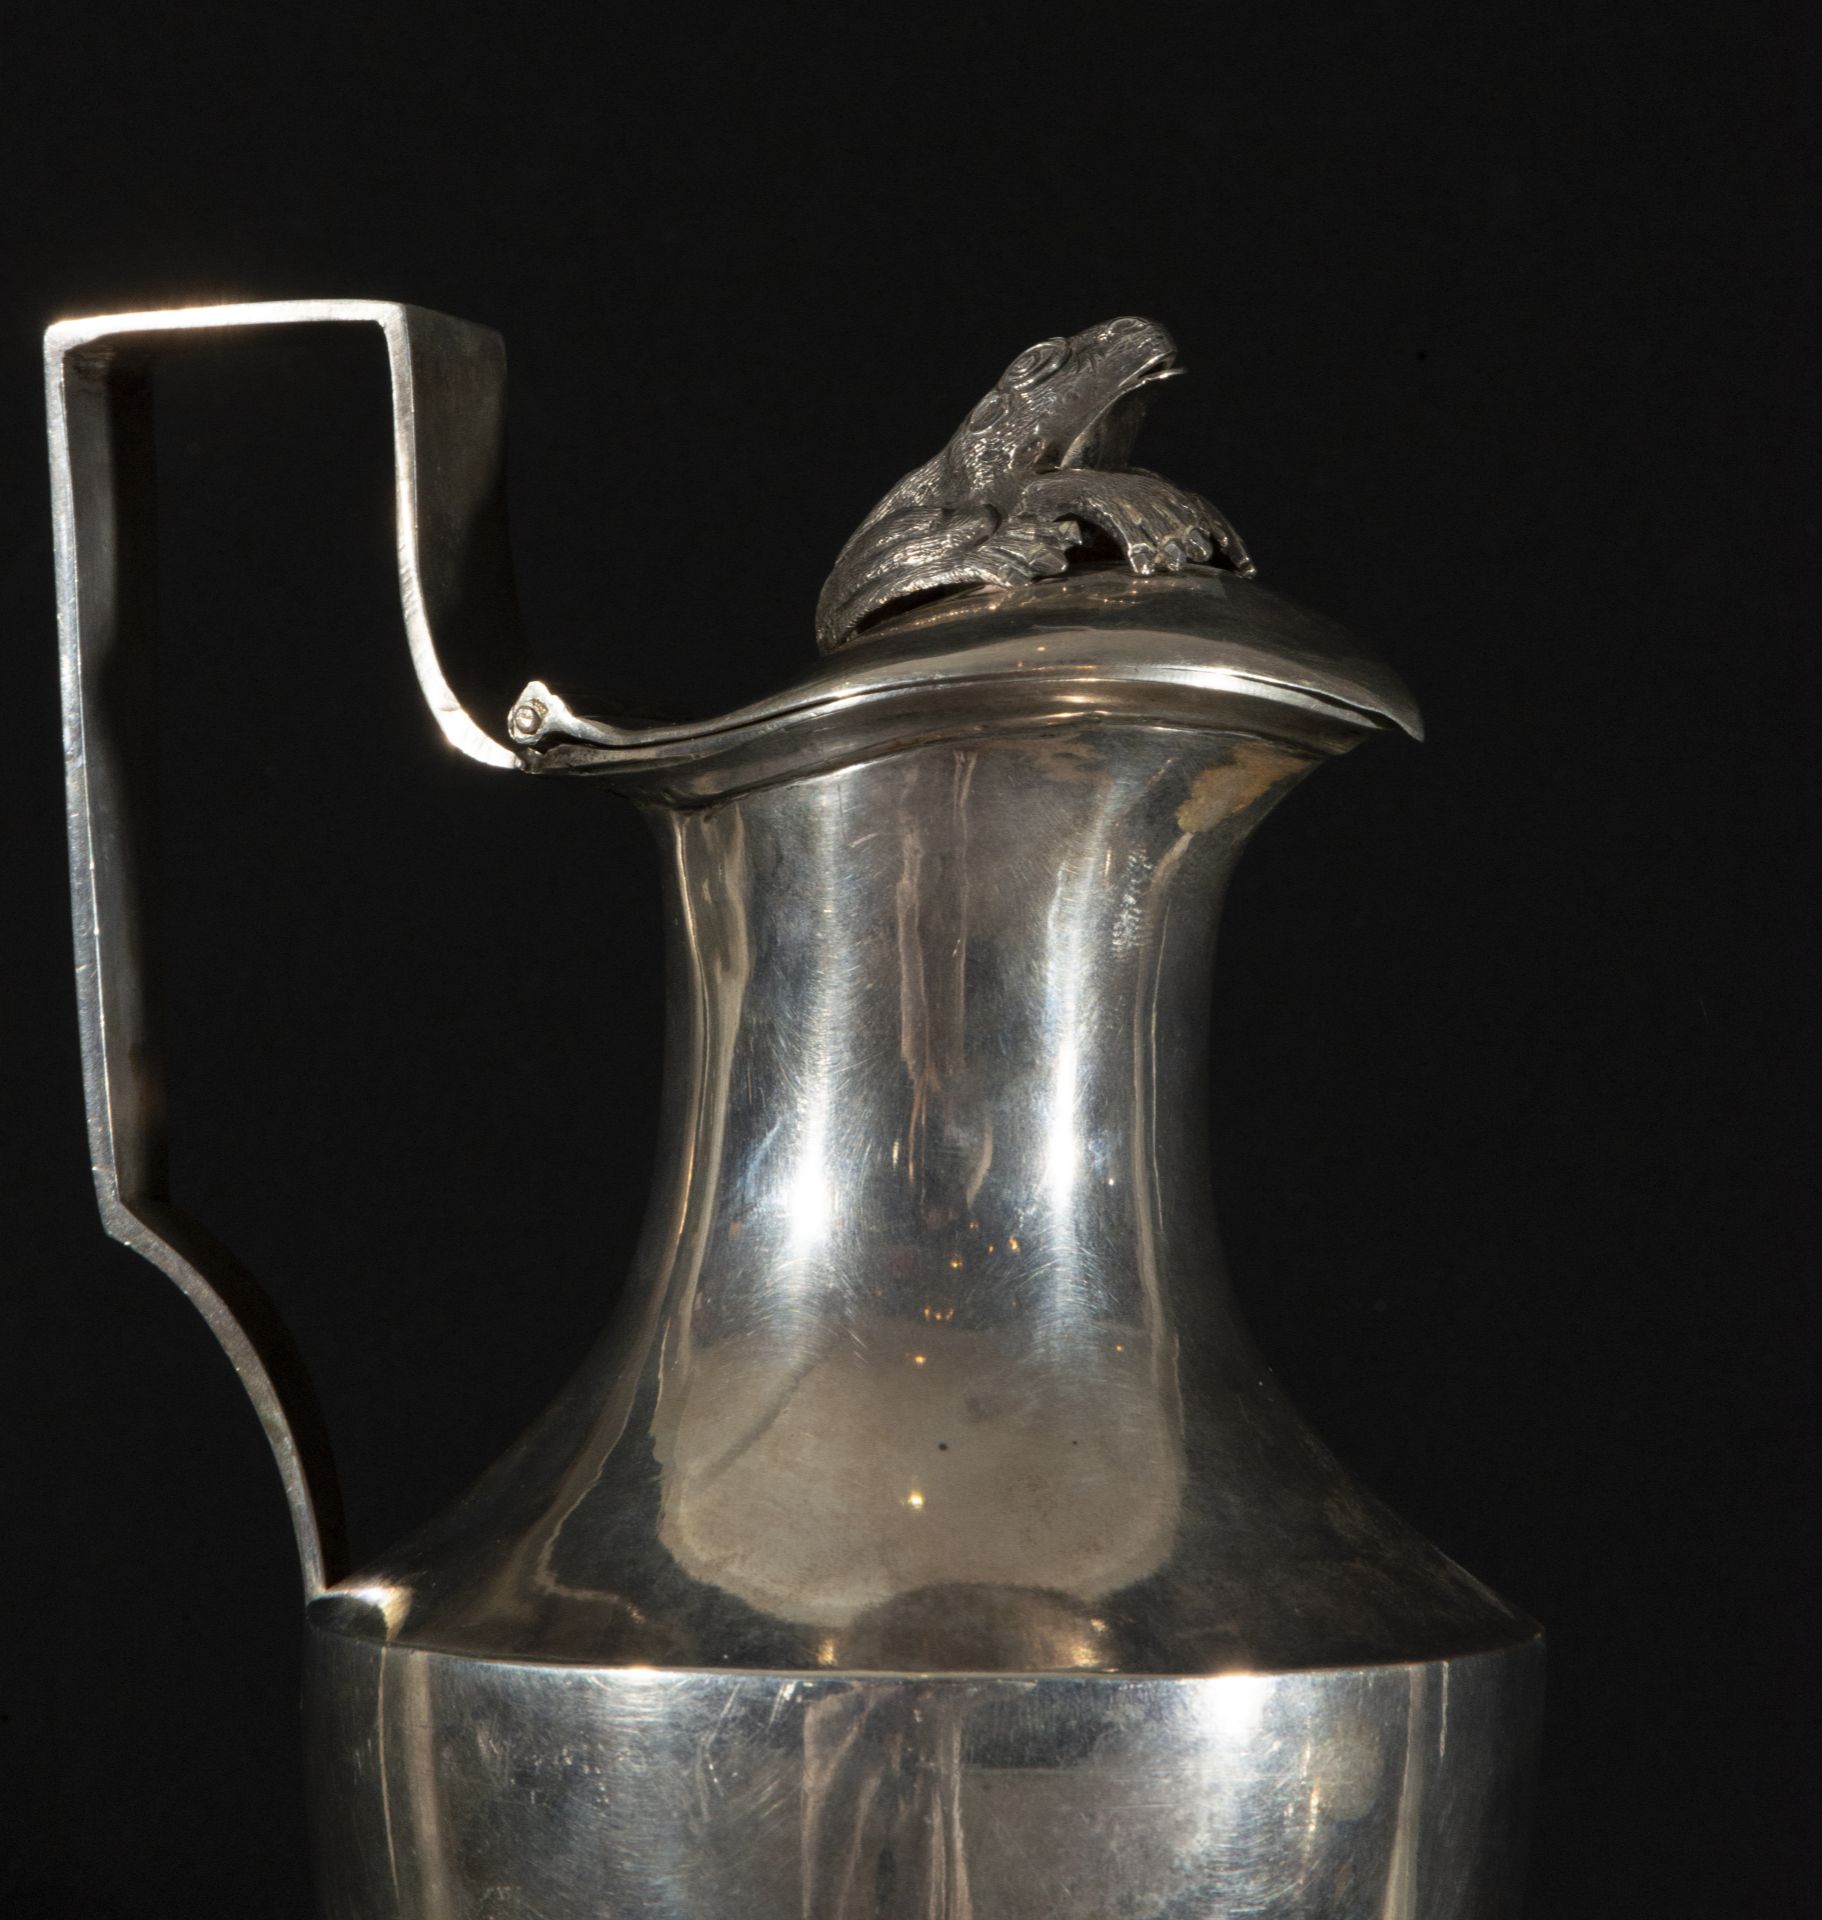 Set of sterling silver pitcher and salt in Spanish silver, late XVIII century, Cordoba marks - Image 5 of 7